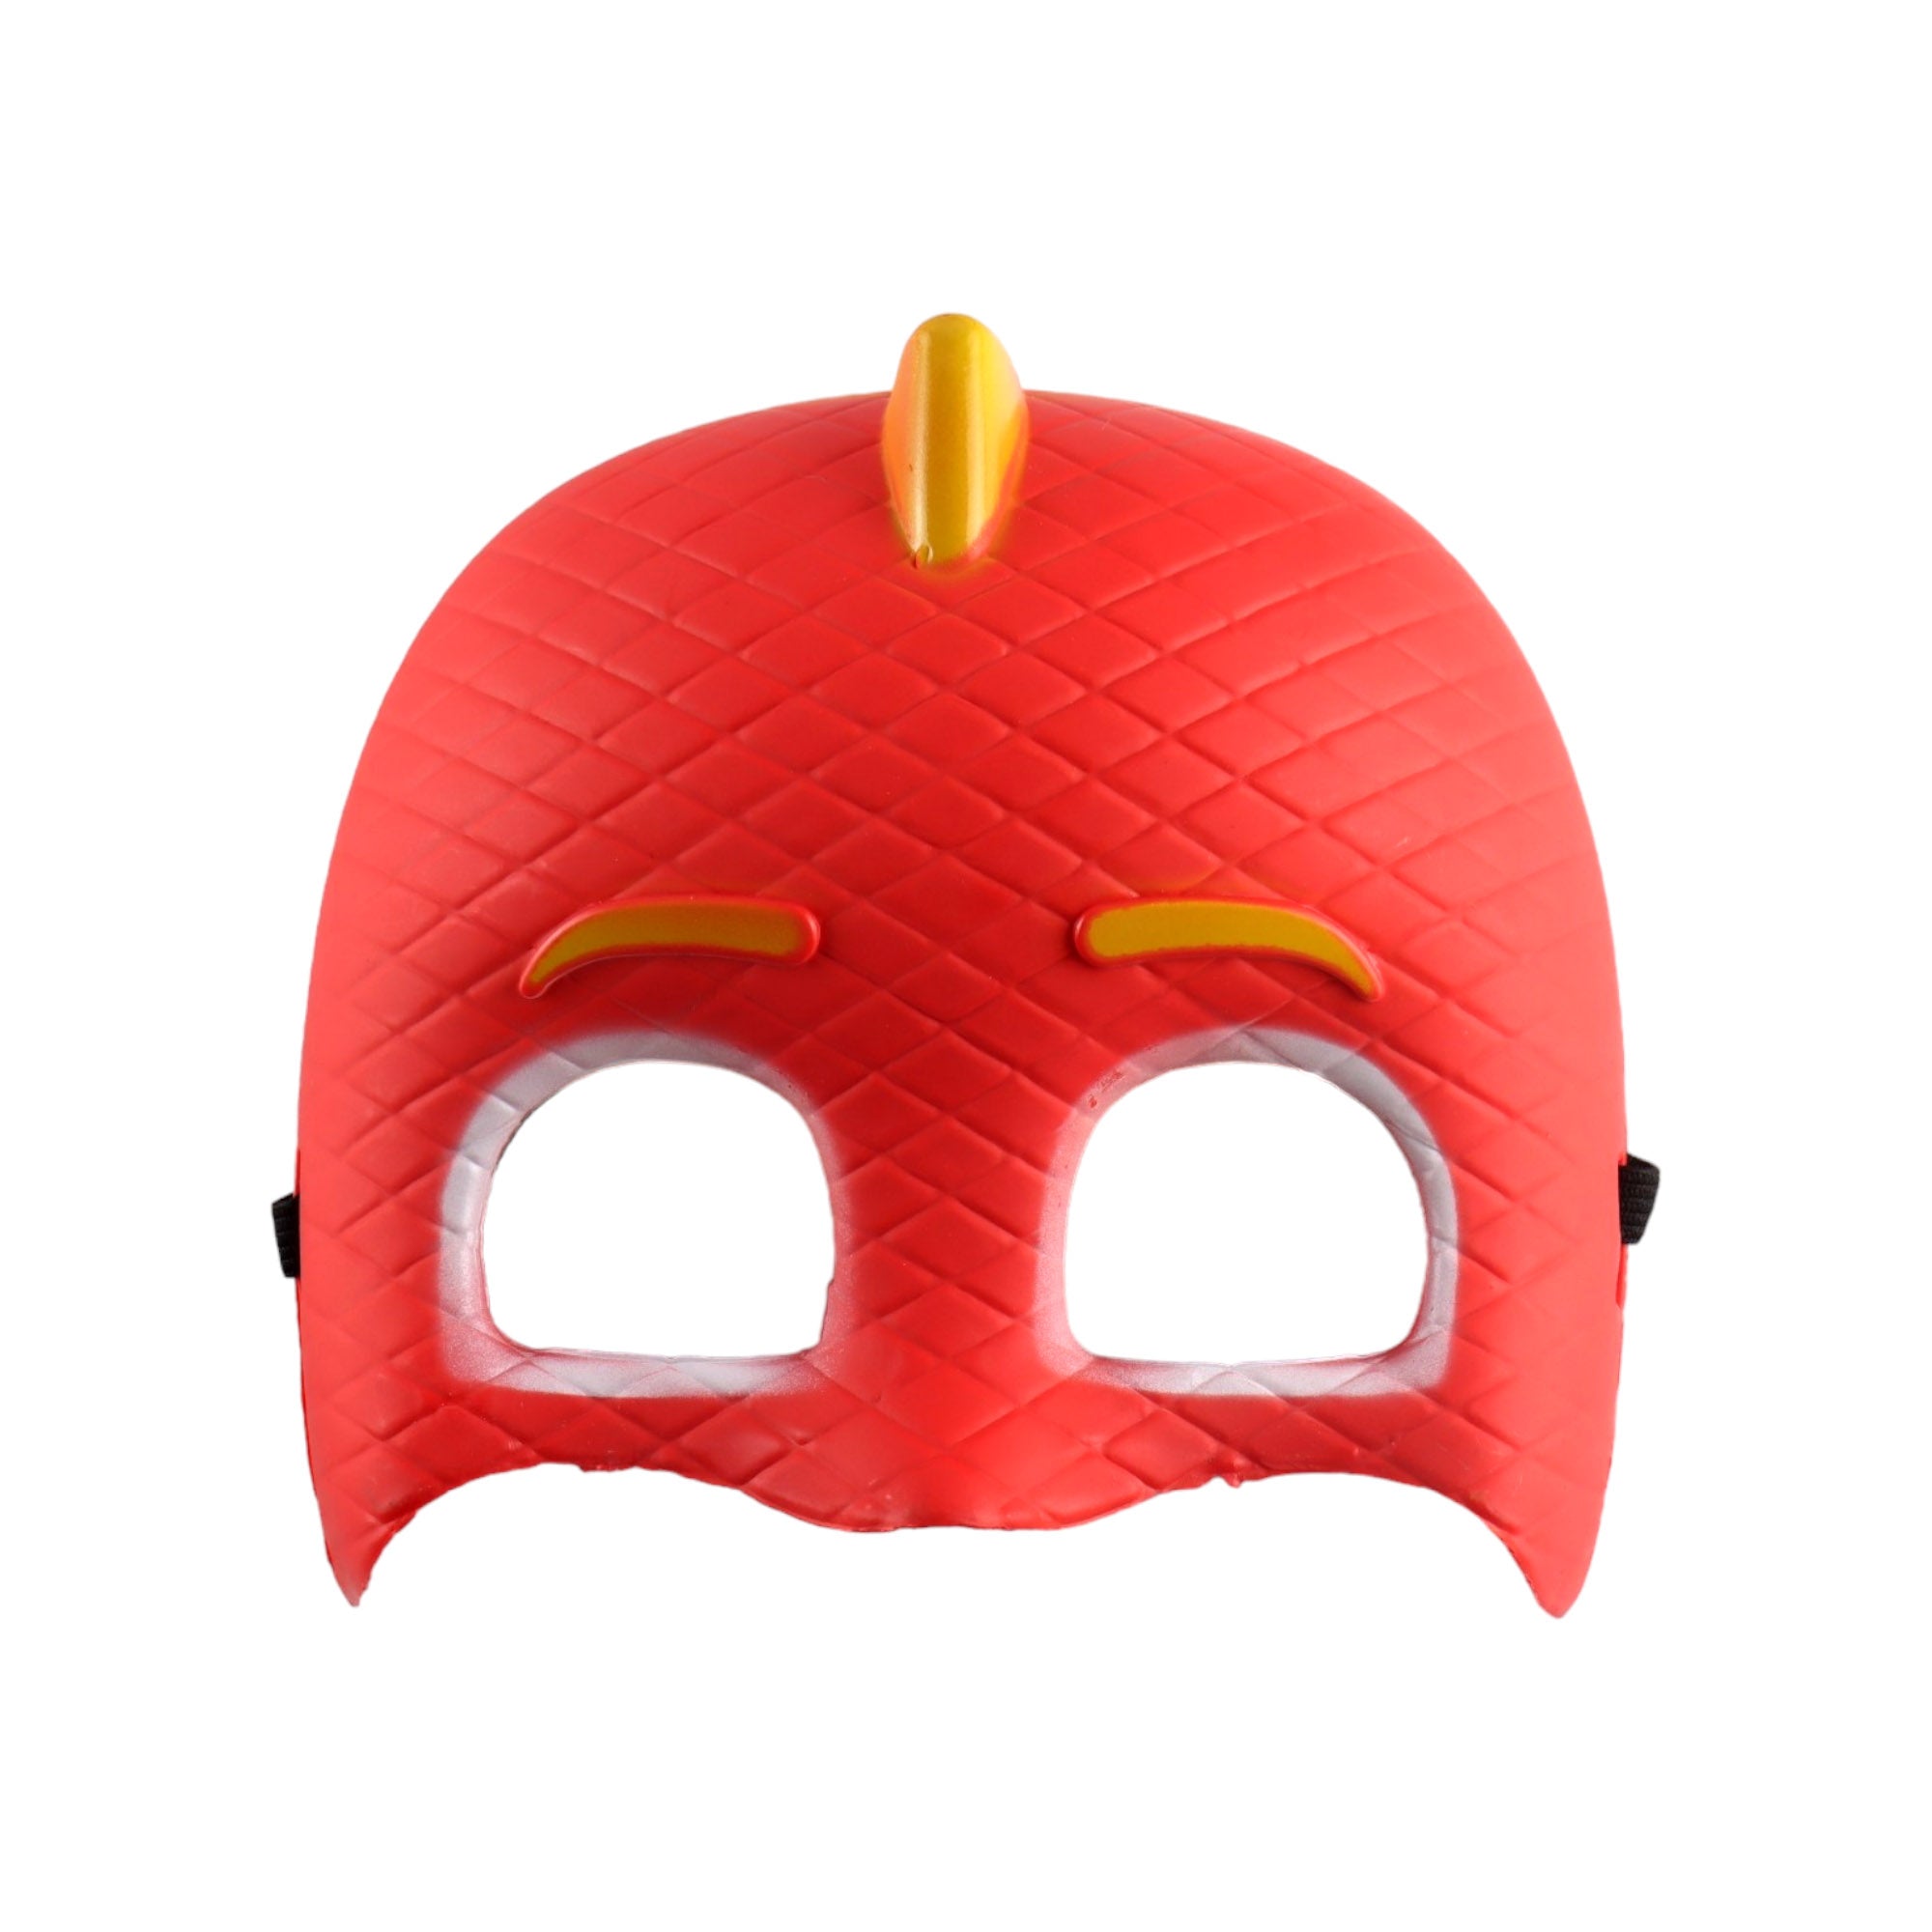 Kids Party Mask Blue or Red